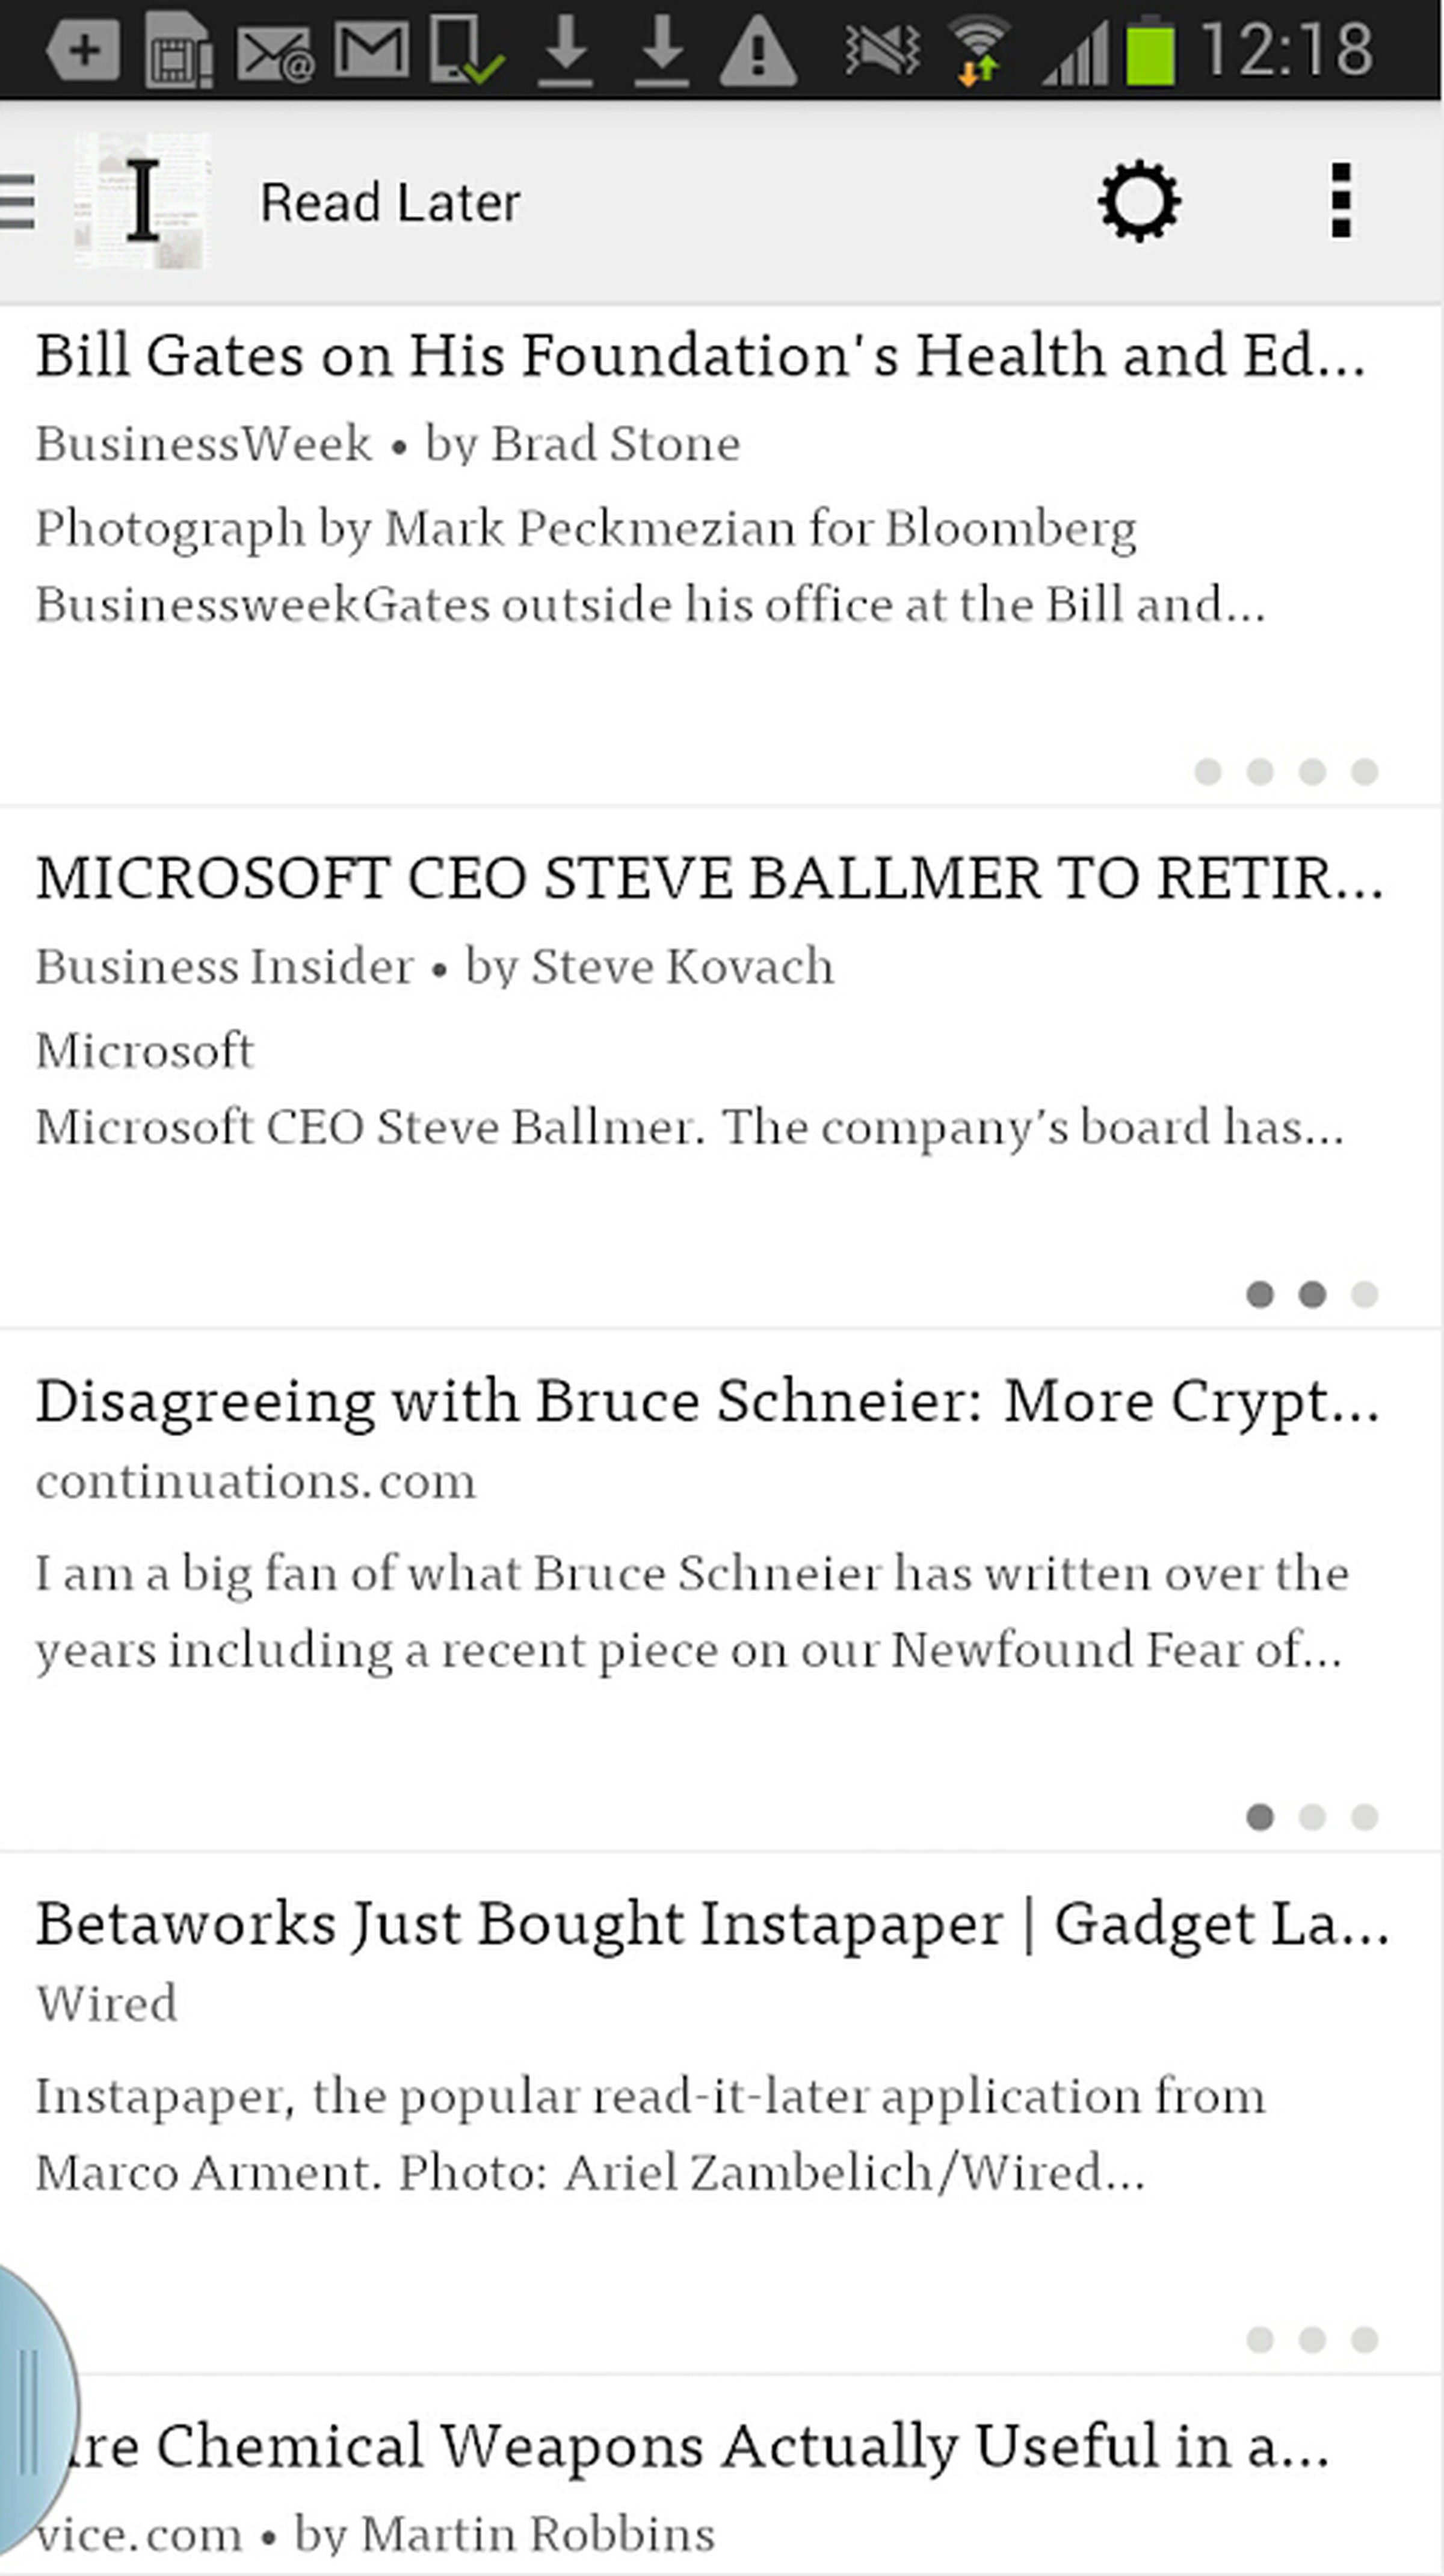 Instapaper for Android refresh screenshots 